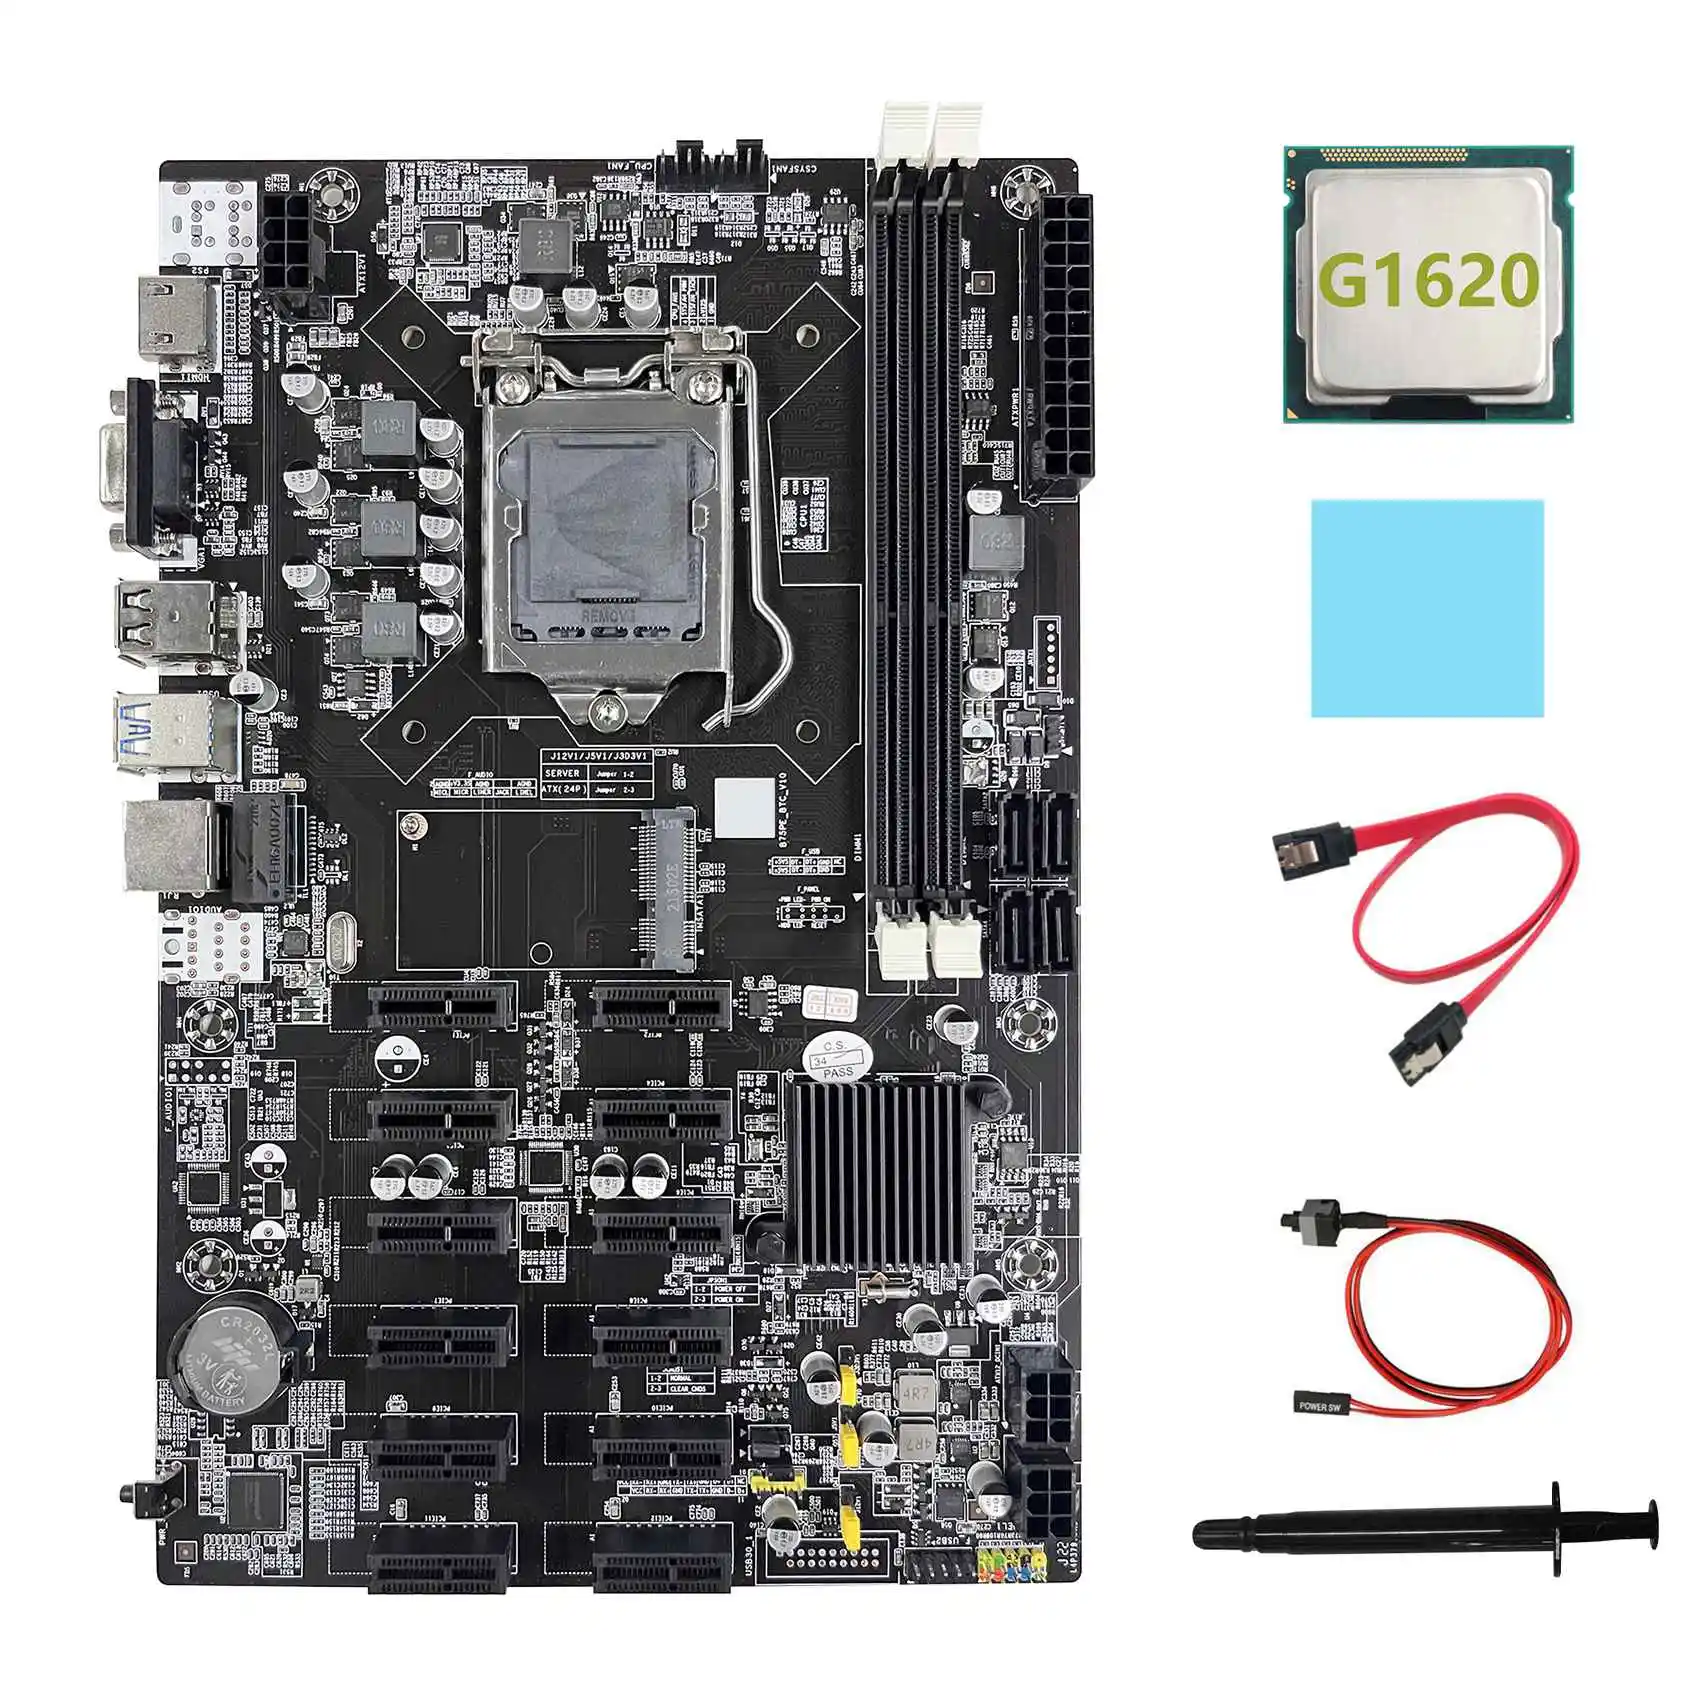 B75 12 PCIE ETH Mining Motherboard+G1620 CPU+SATA Cable+Switch Cable+Thermal Pad+Thermal Grease BTC Miner Motherboard